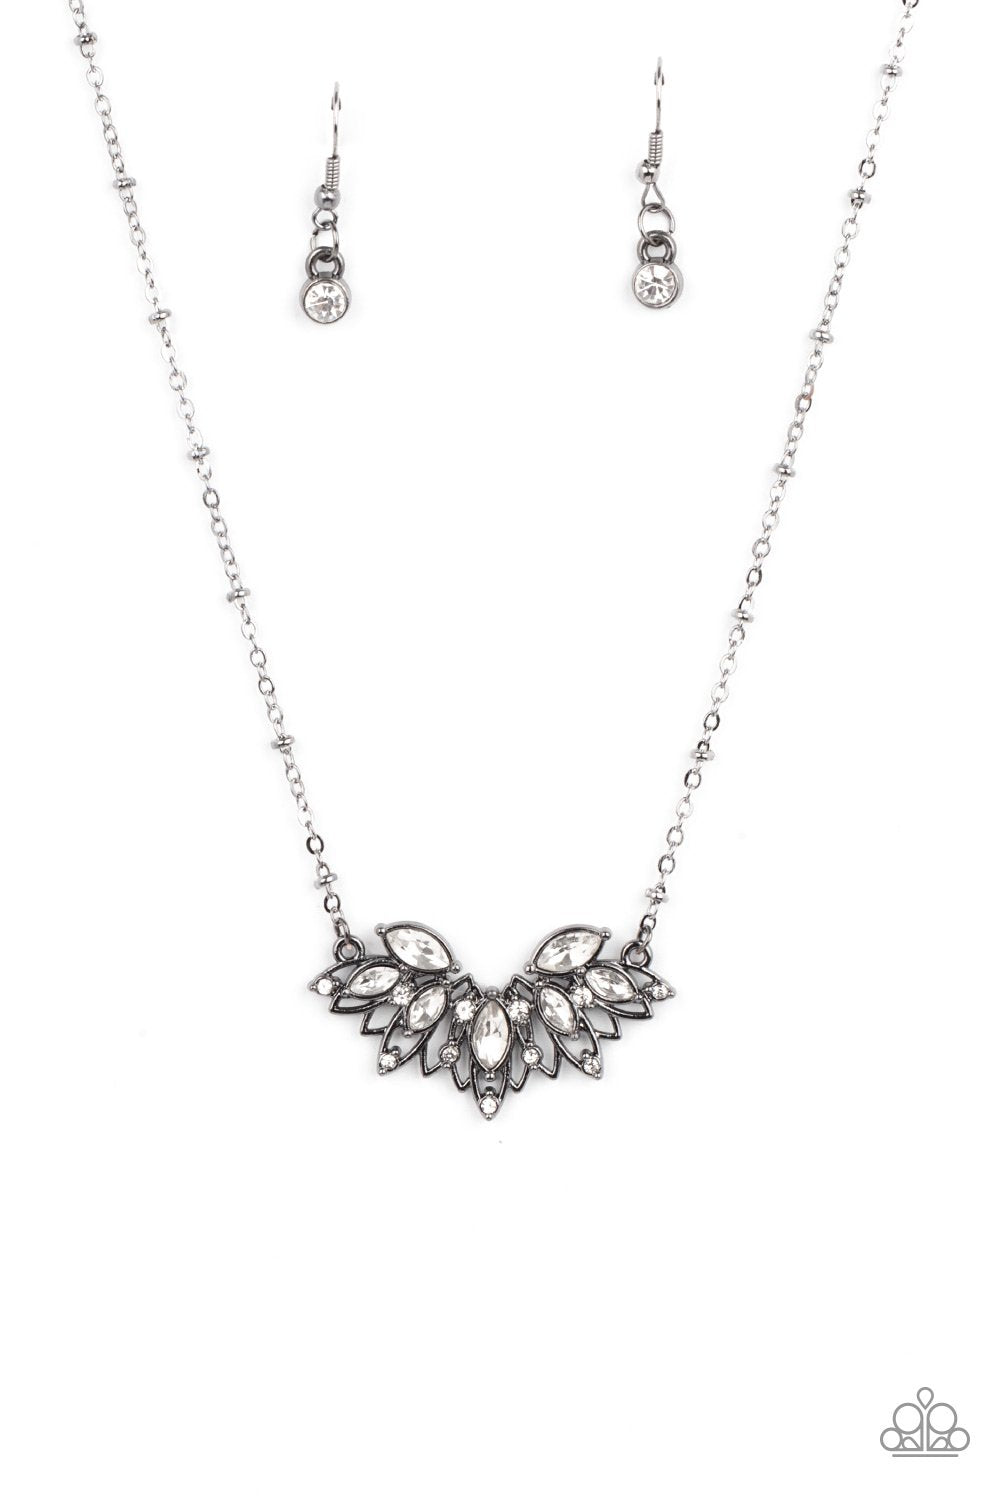 Deluxe Diadem Gunmetal Black and White Rhinestone Necklace - Paparazzi Accessories- lightbox - CarasShop.com - $5 Jewelry by Cara Jewels